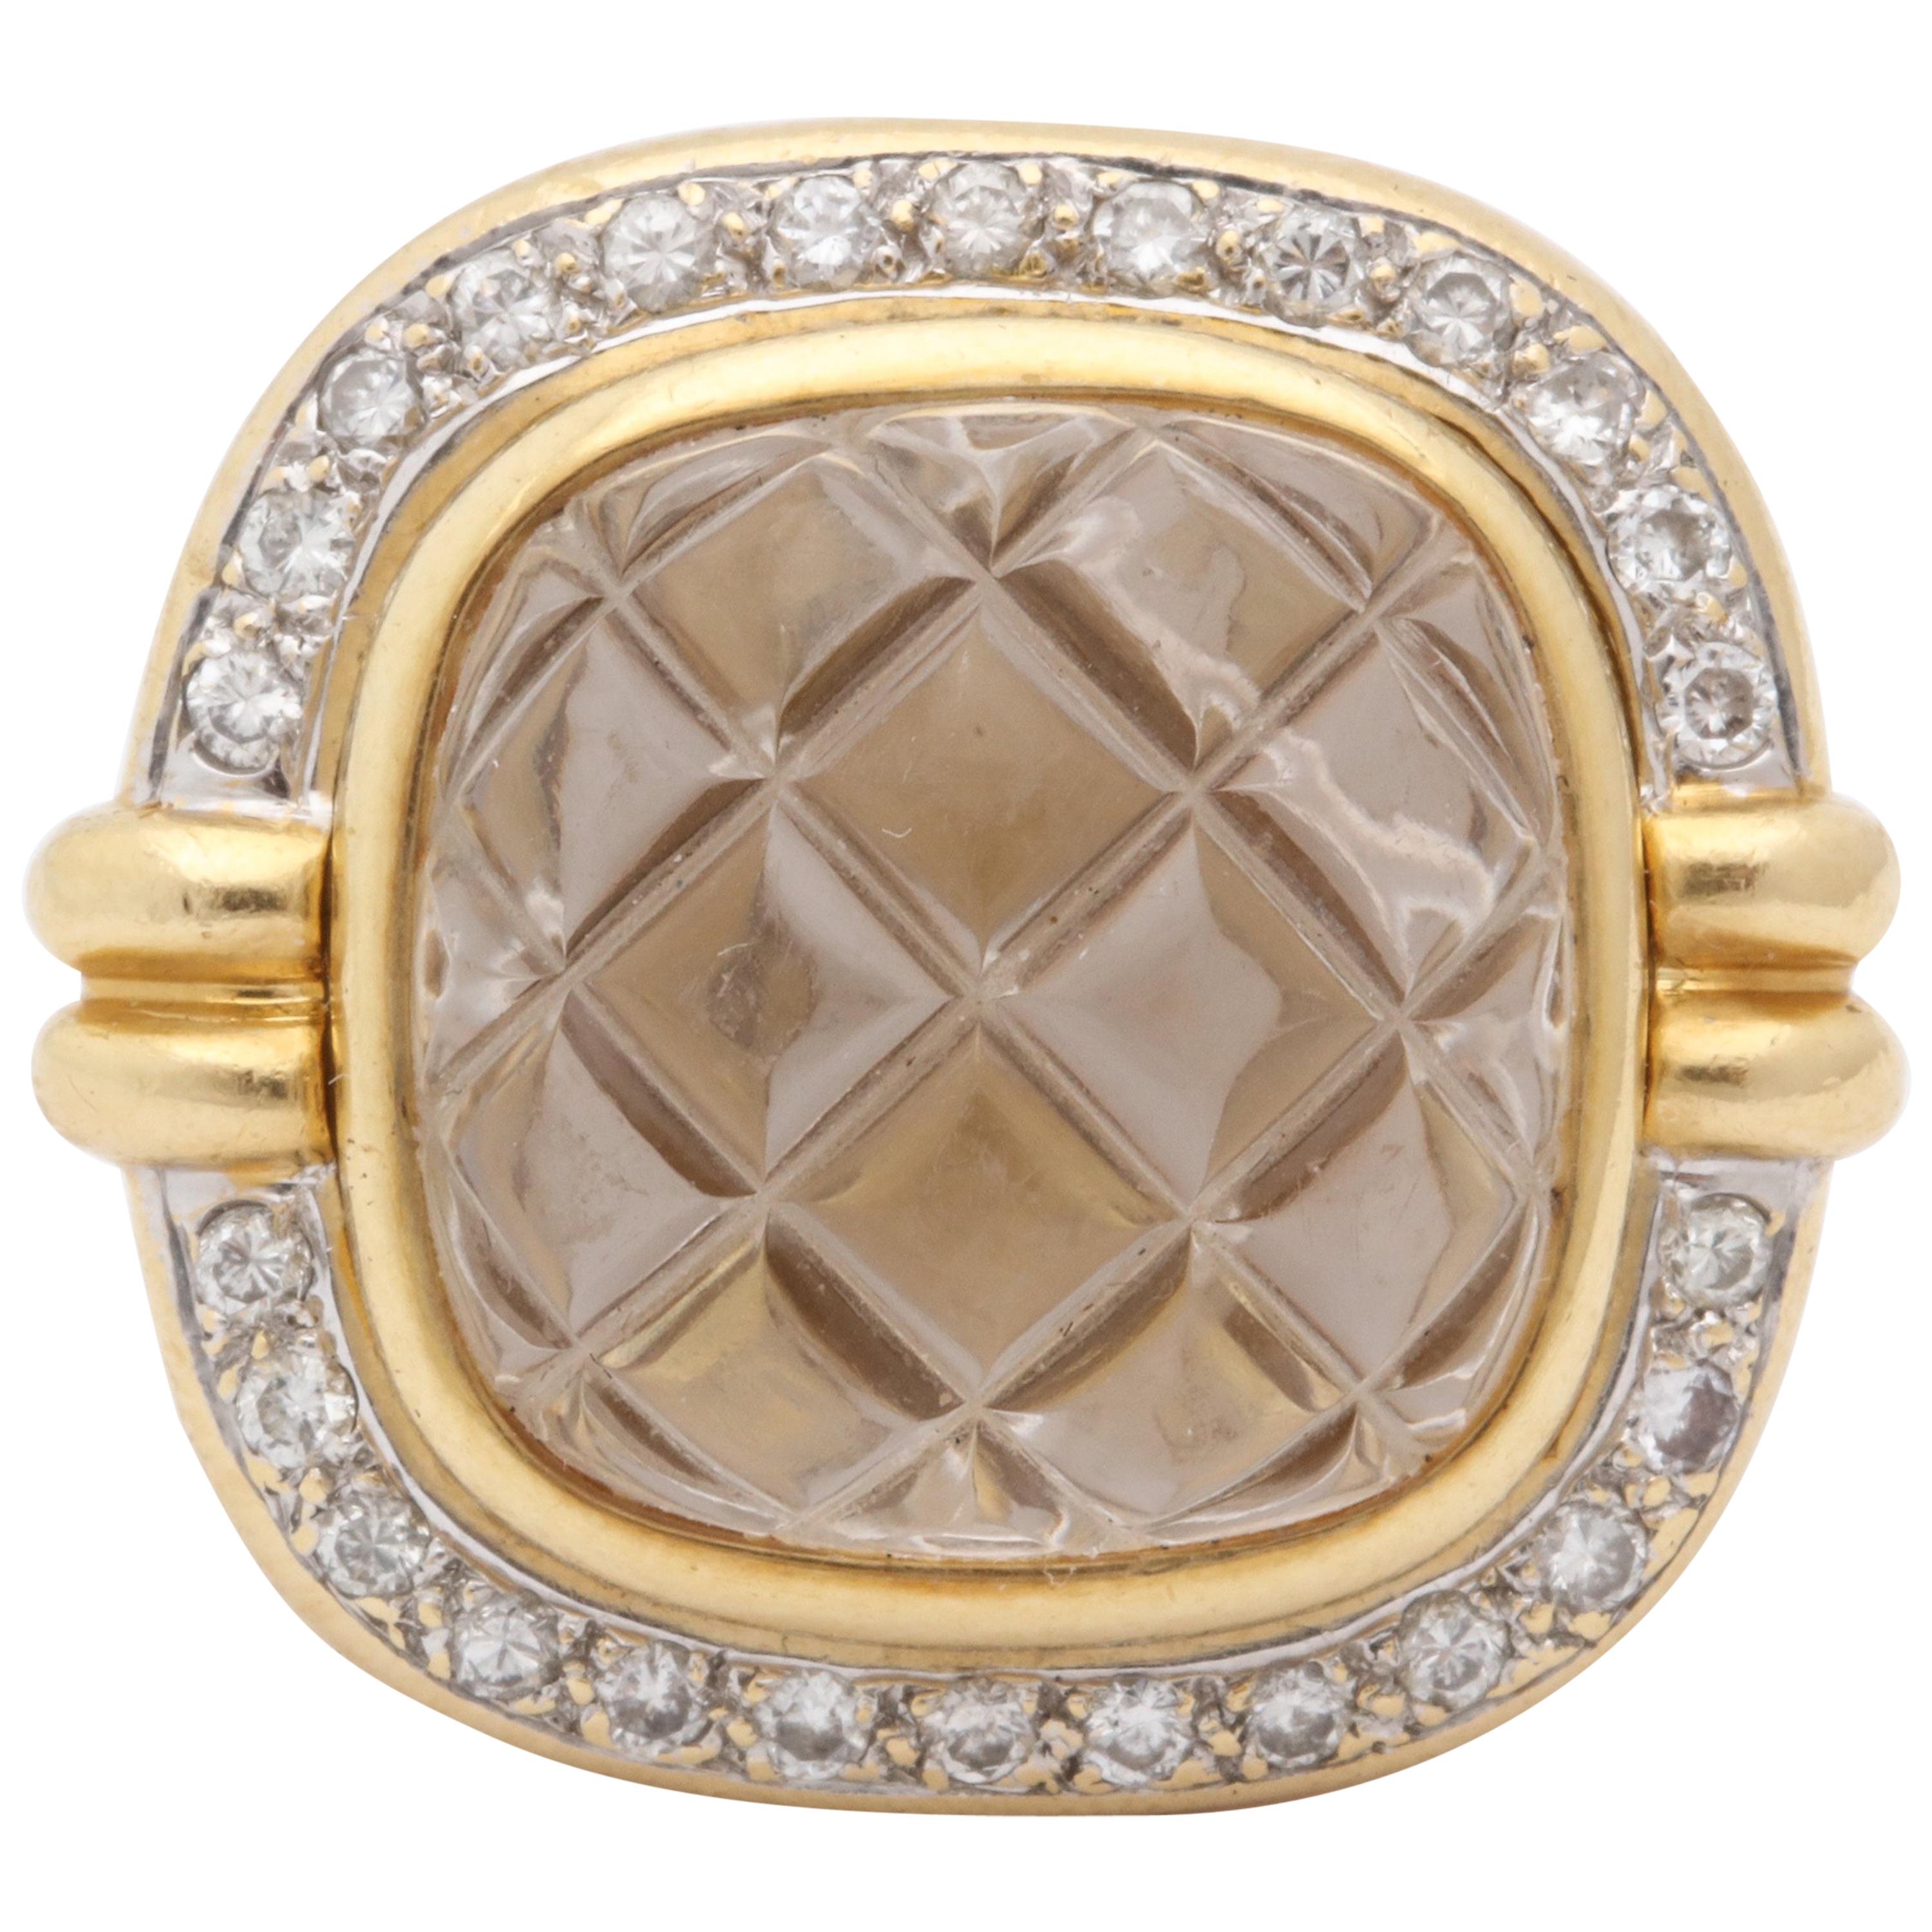 1980 Heavy Quilted Rock Crystal with Diamonds Fantasy Large Gold Cocktail Ring